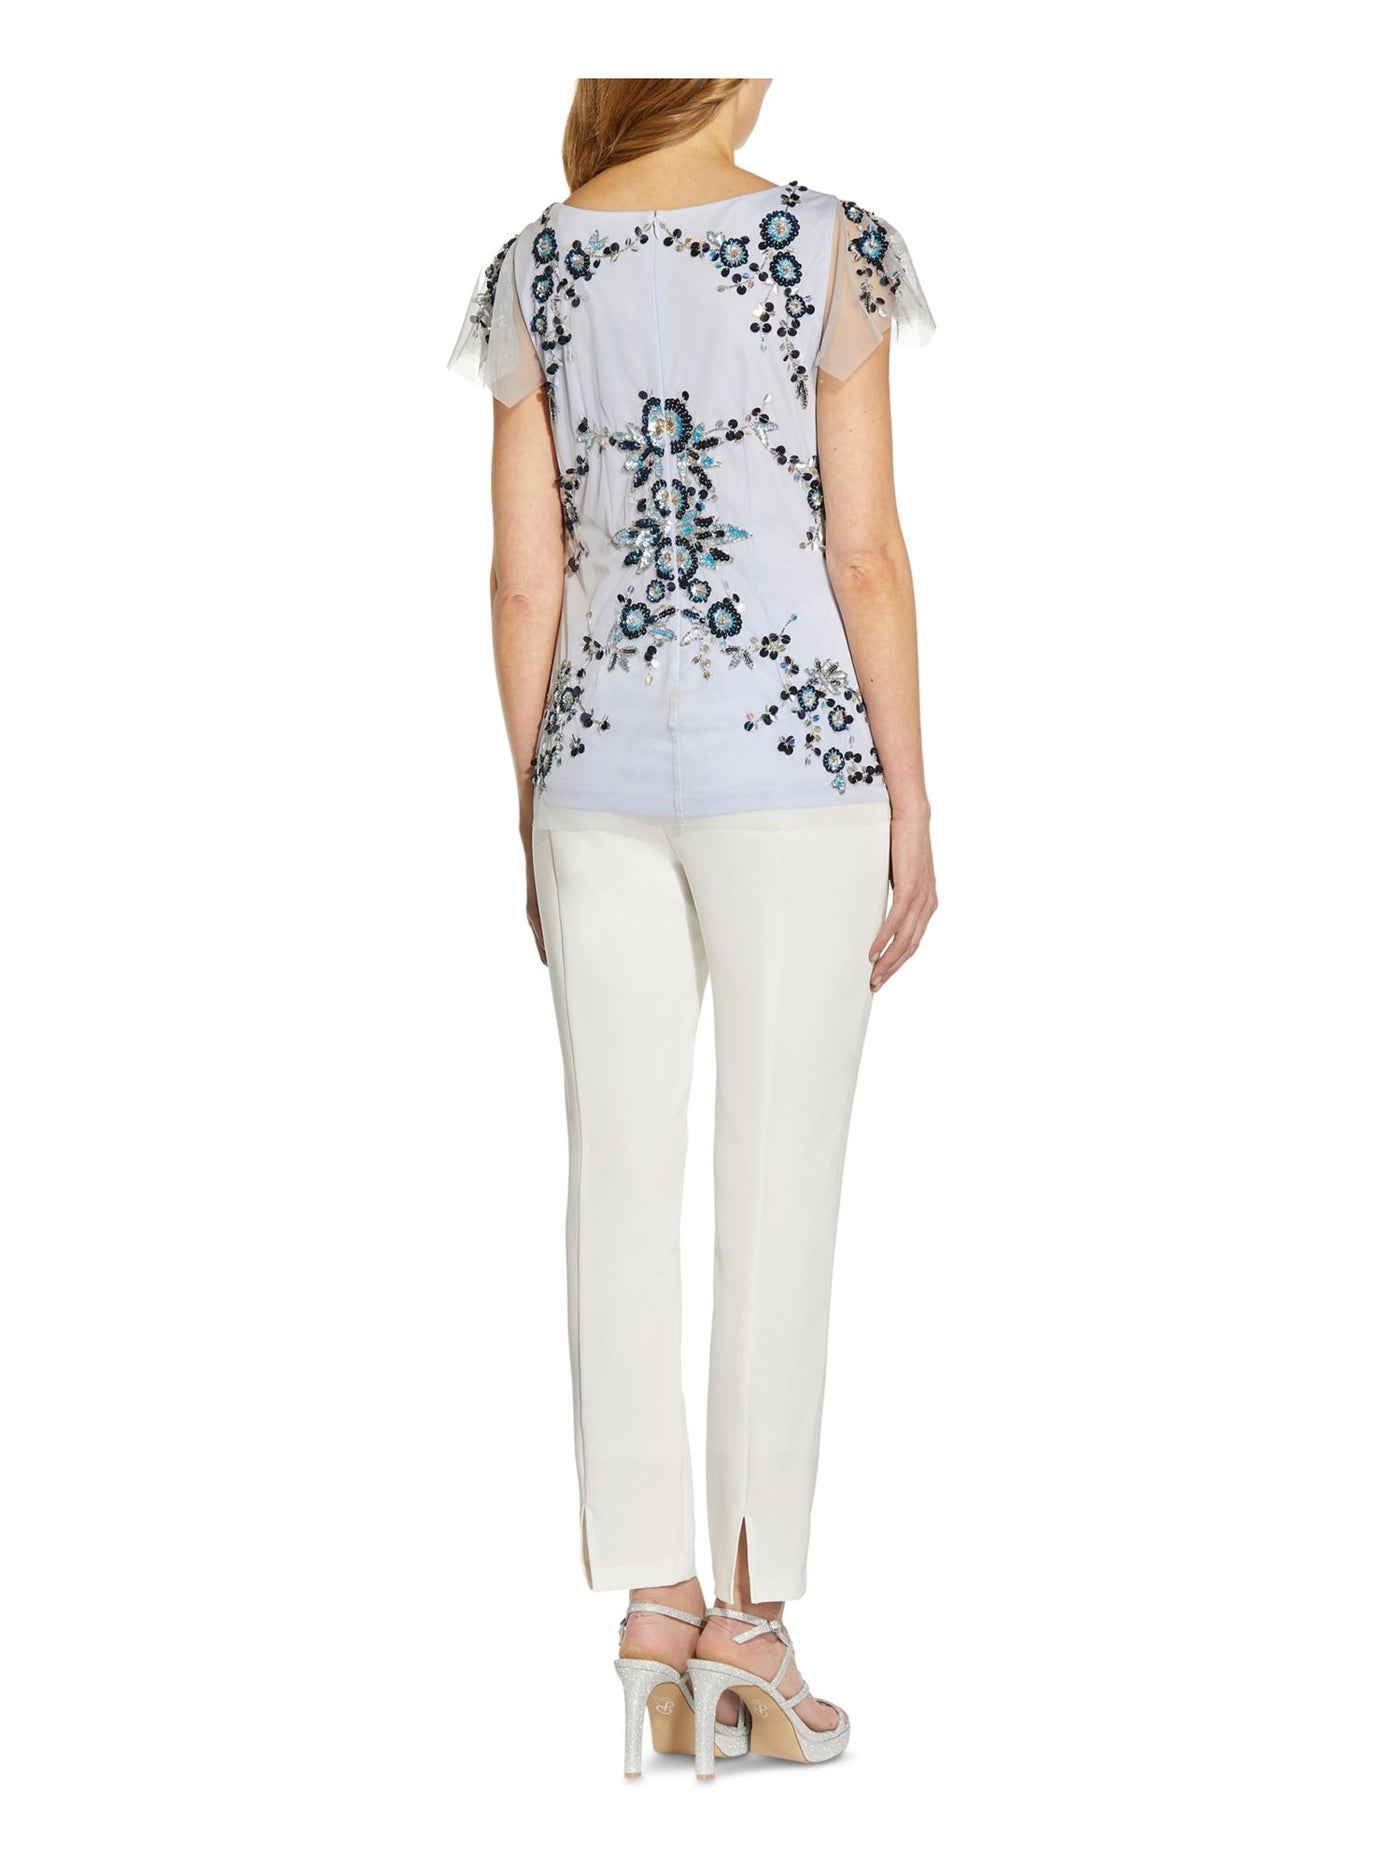 ADRIANNA PAPELL Womens Light Blue Embellished Sequined Zippered Lined Mesh Floral Flutter Sleeve V Neck Wear To Work Top 8